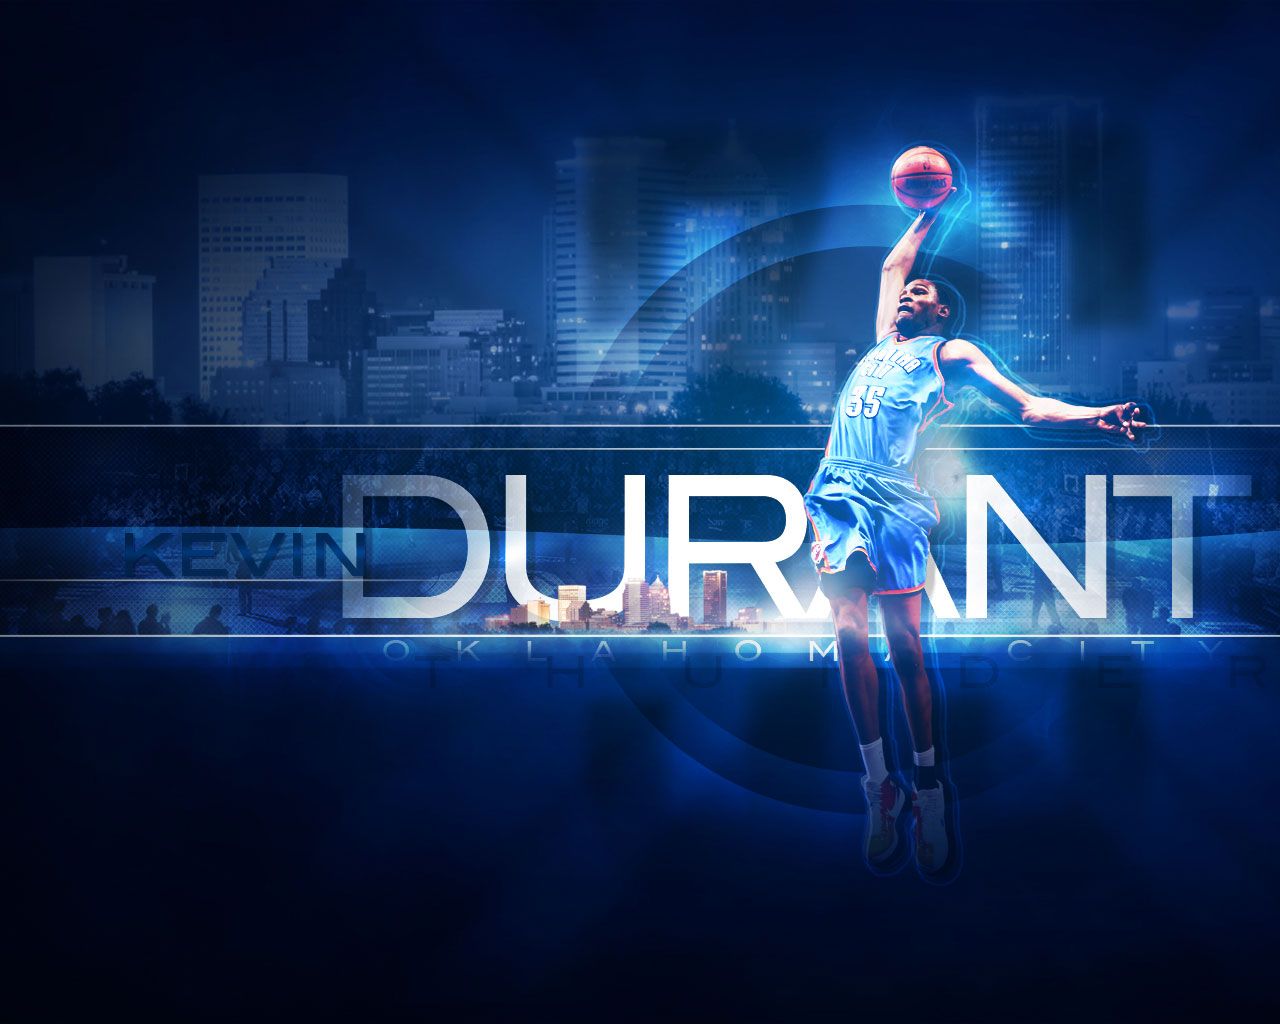 Kevin Durant Wallpaper, Kevin Durant Backgrounds, New Wallpapers